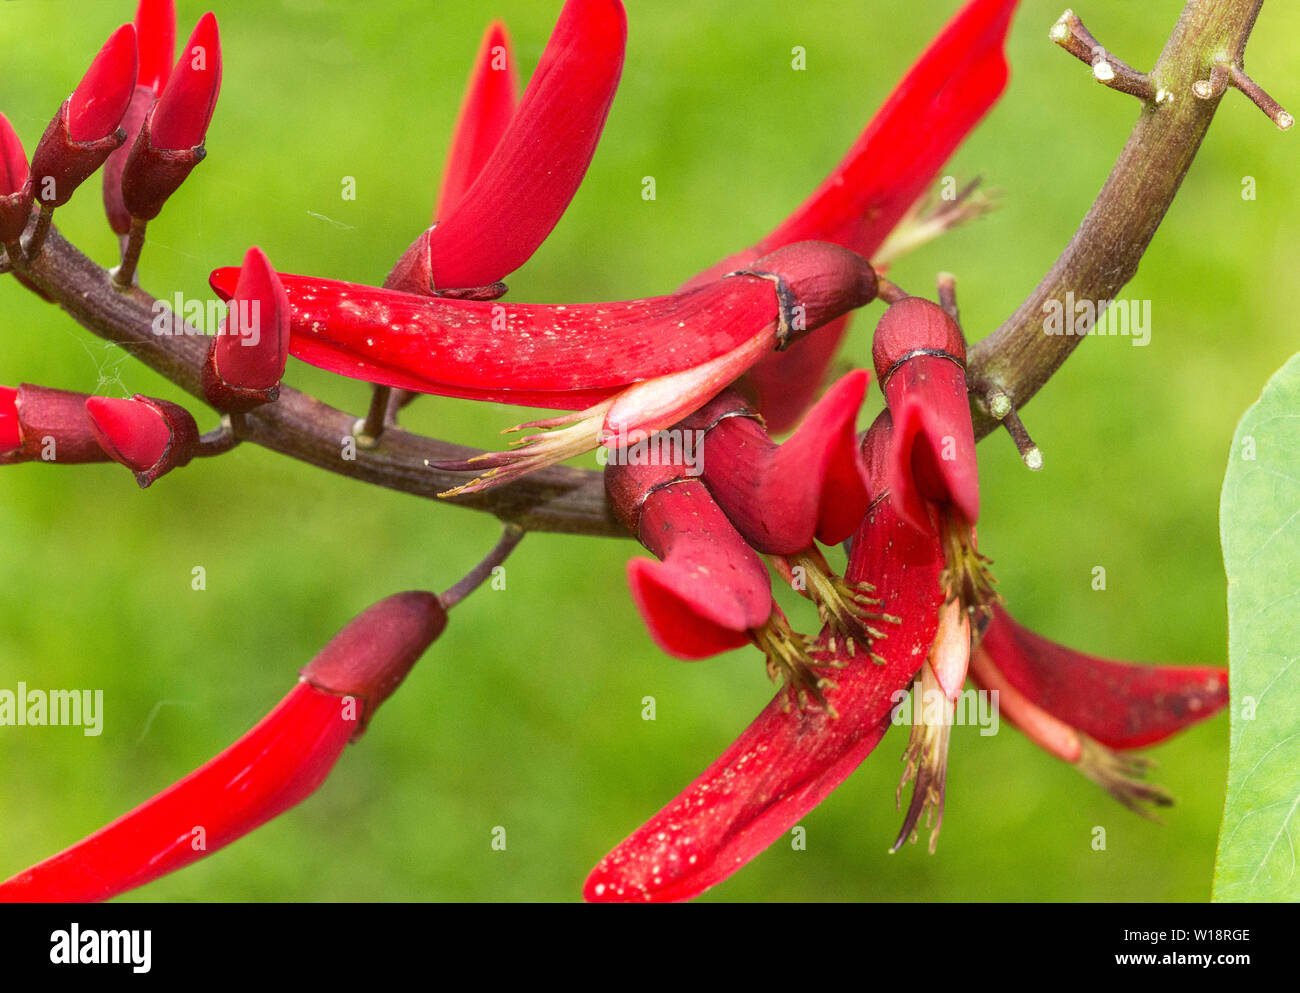 Coral Bean (Erythrina herbacea) originates from the USA and Mexico.The plant is used medicinally but the seeds are poisonous. Stock Photo